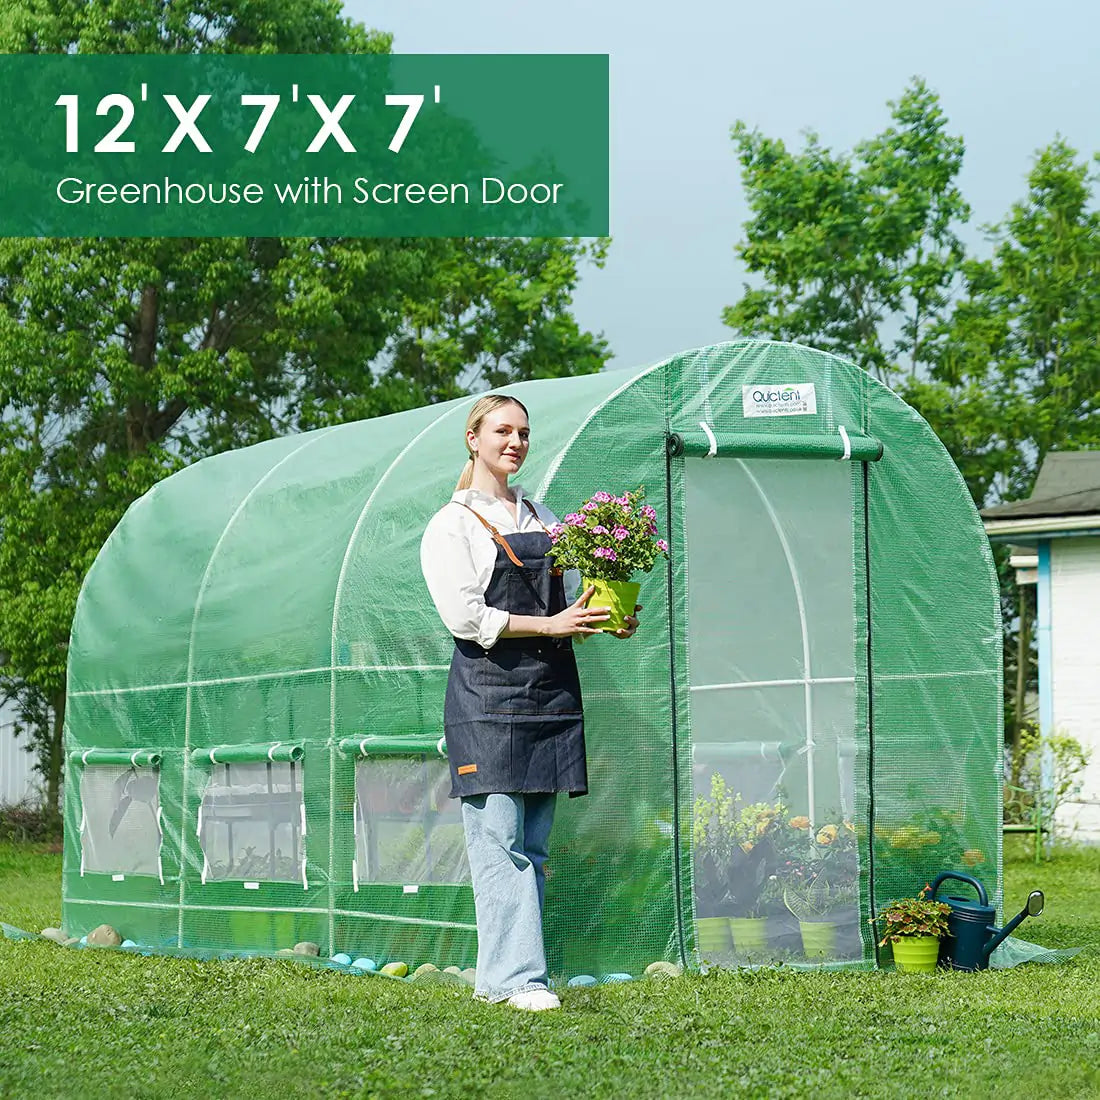 excellent 12x7 greenhouse Frame